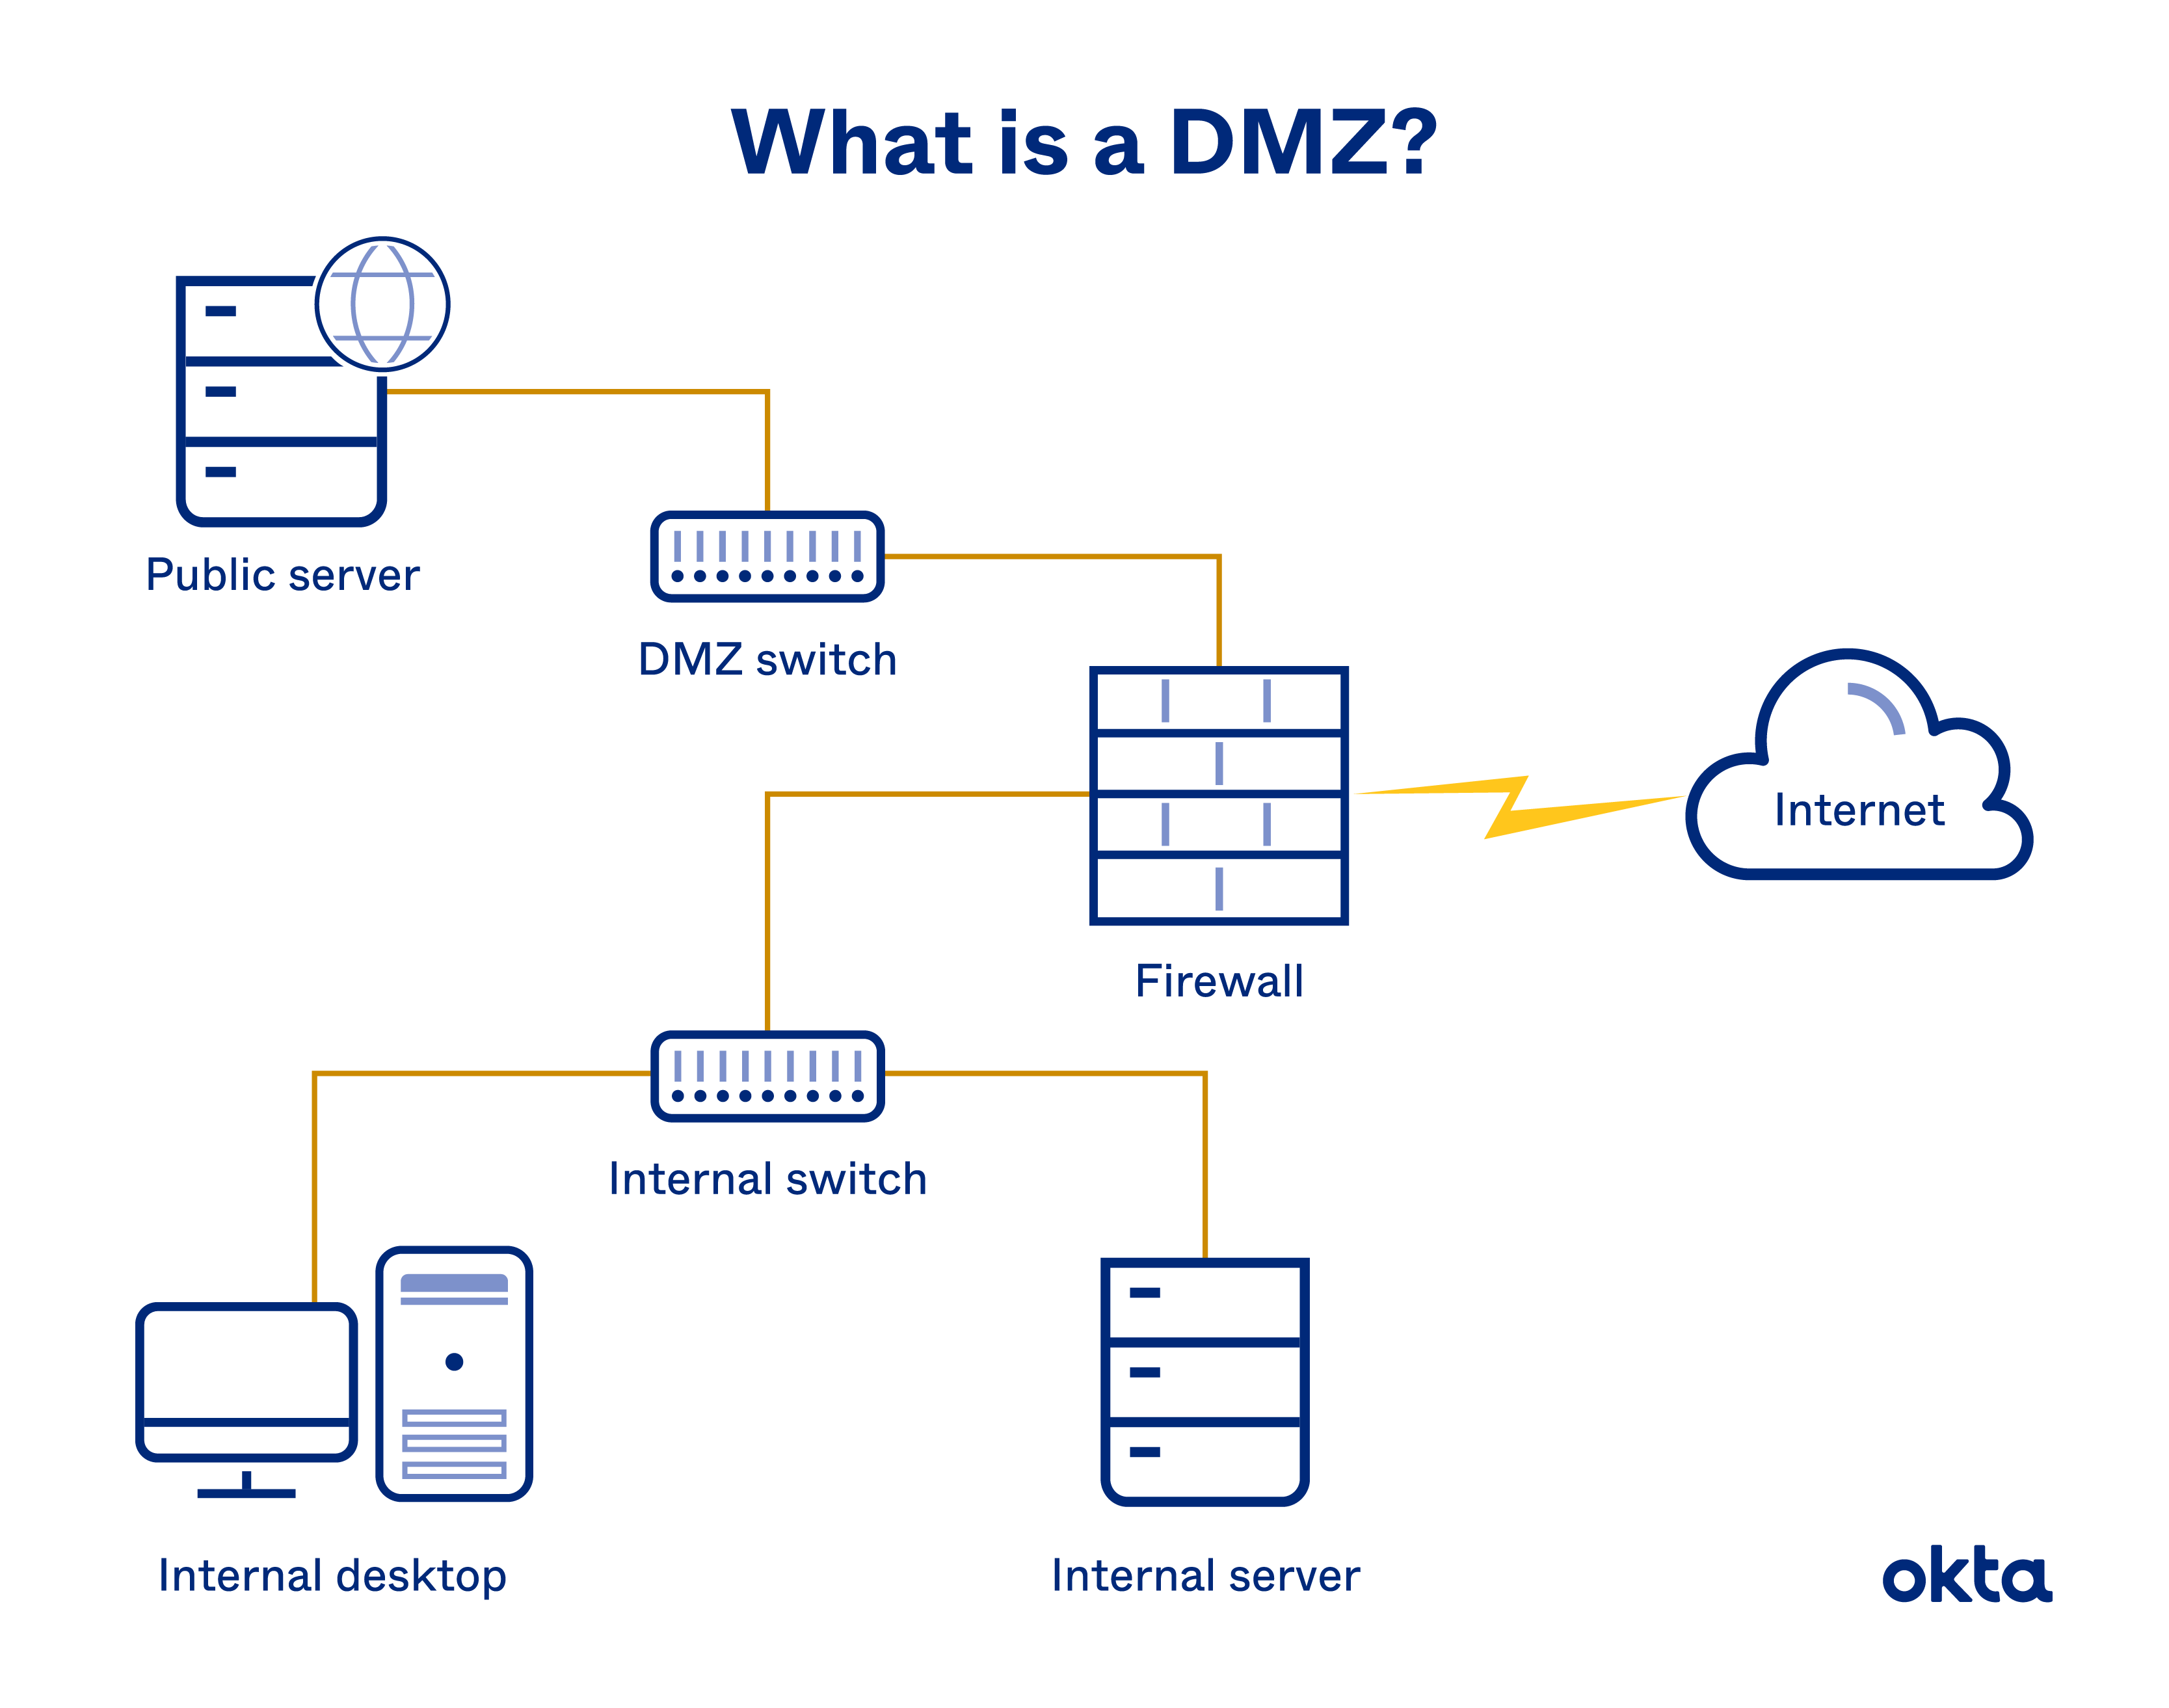 A graphic image showing what a DMZ is, where a network is separated between its public facing infrastructure and internal segments, separated from the internet by a firewall.